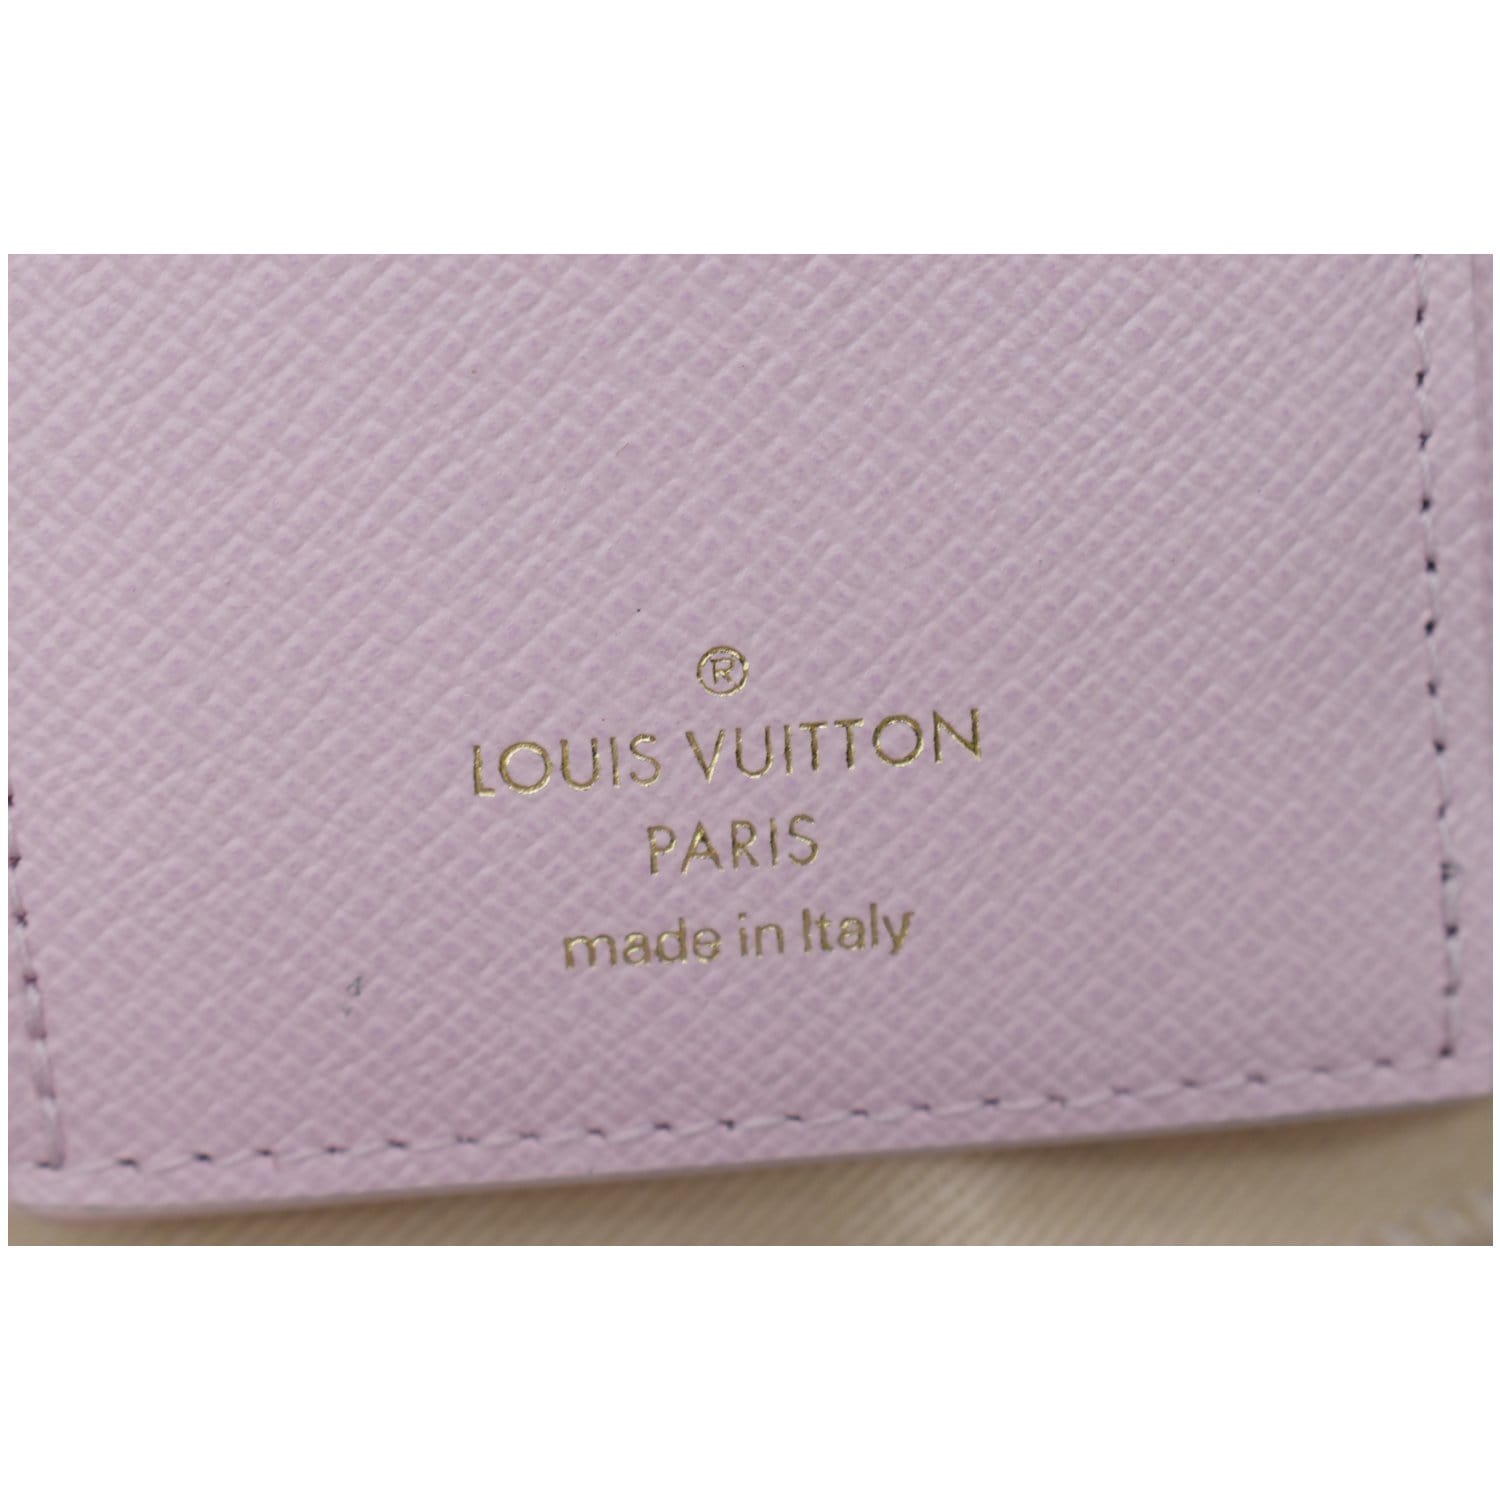 Louis Vuitton Wallet Outdoor Compact Monogram Blue/Red/Brown in